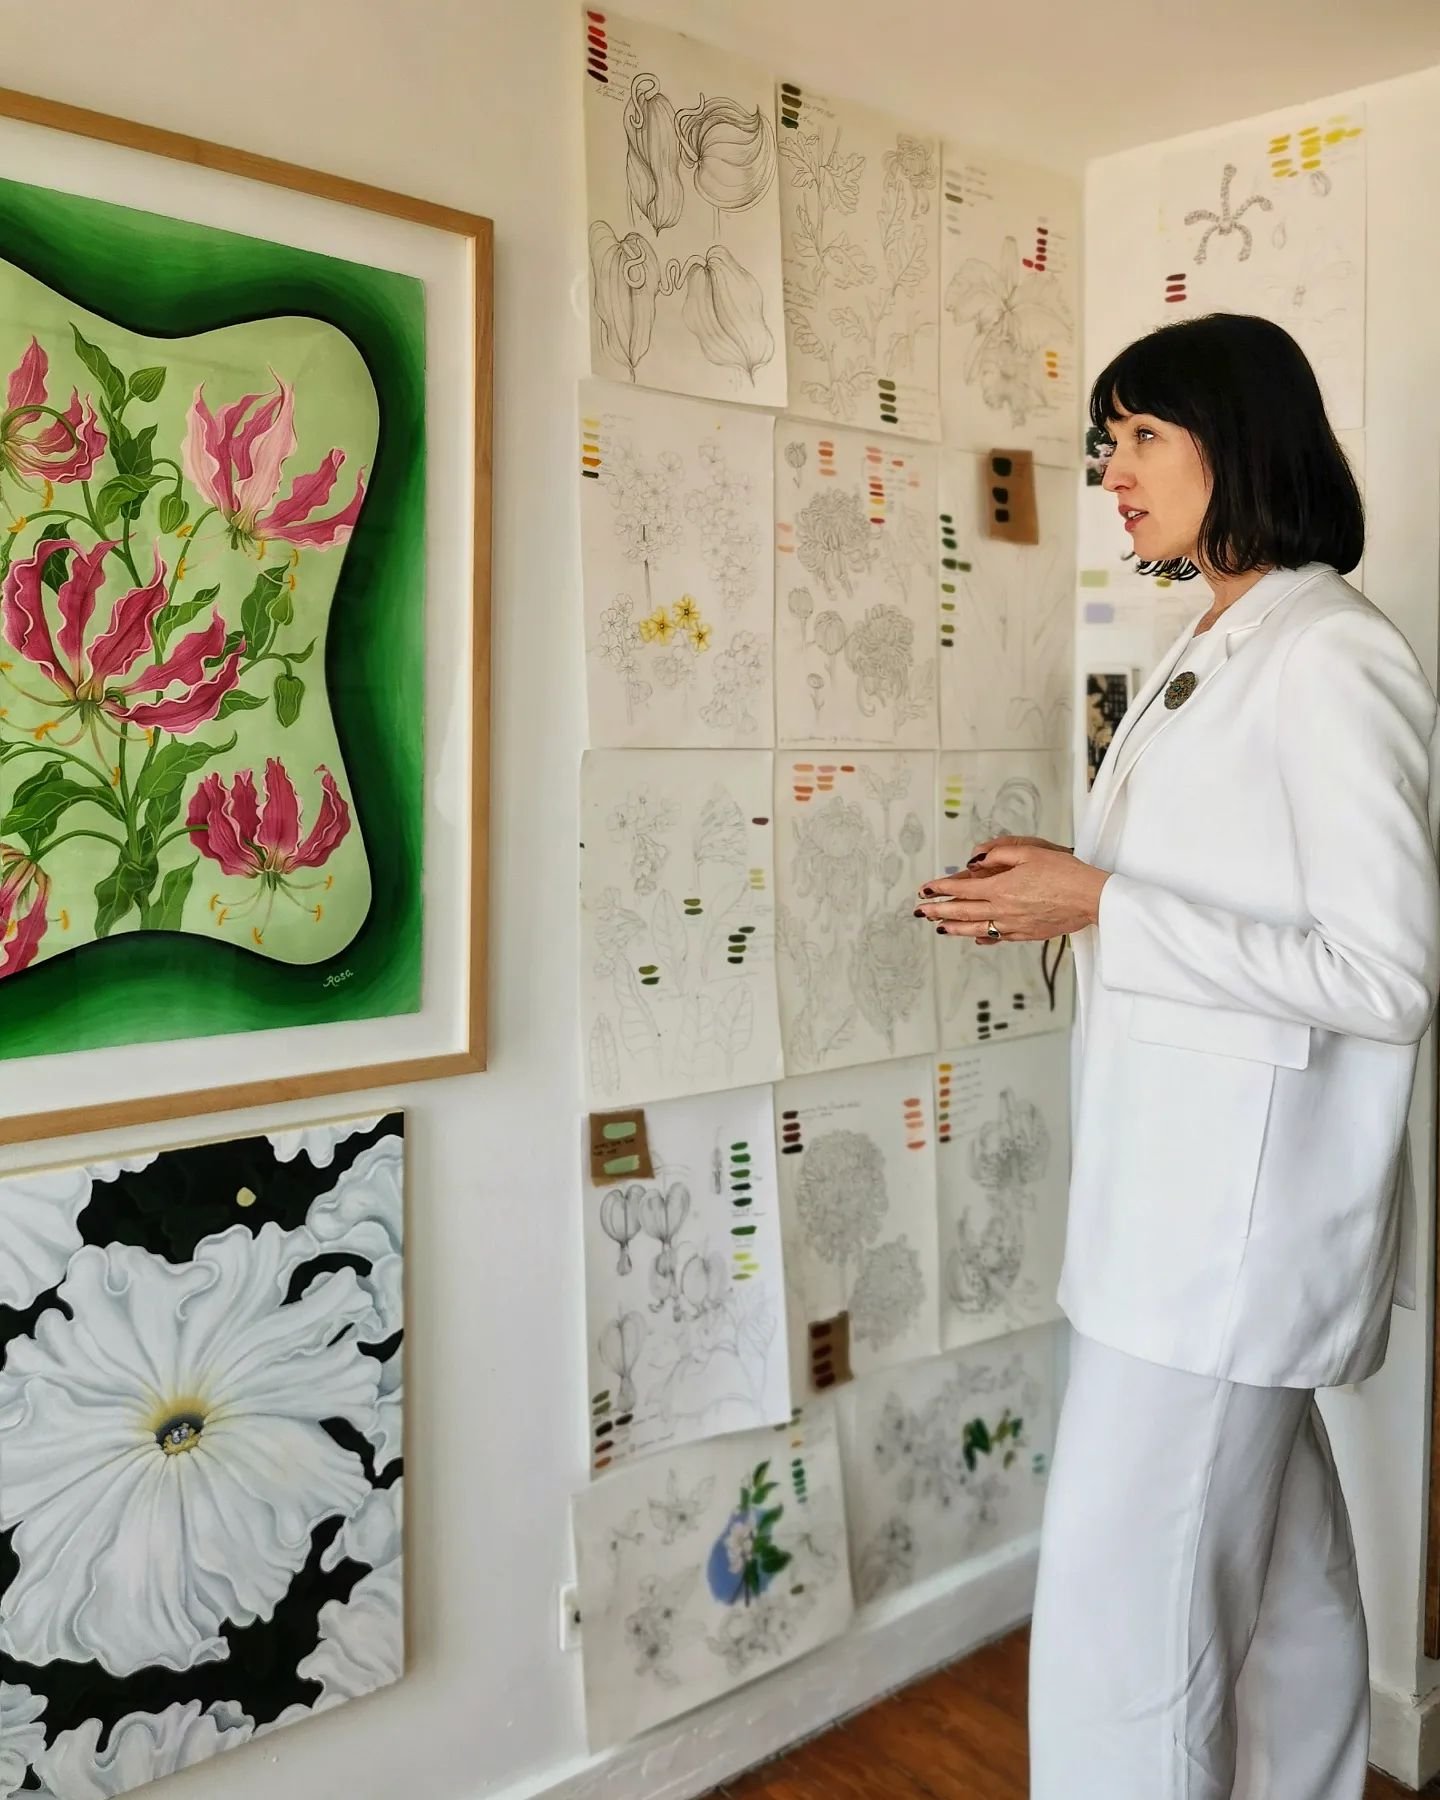 My Open Studio Days ended with a very special visit. Today, I had a great honour to receive Joanna Maria Pilecka, Polish Ambassador to Portugal, in my art studio. Exchanging about the Polish culture, Heritage and Art made this visit even more extraor